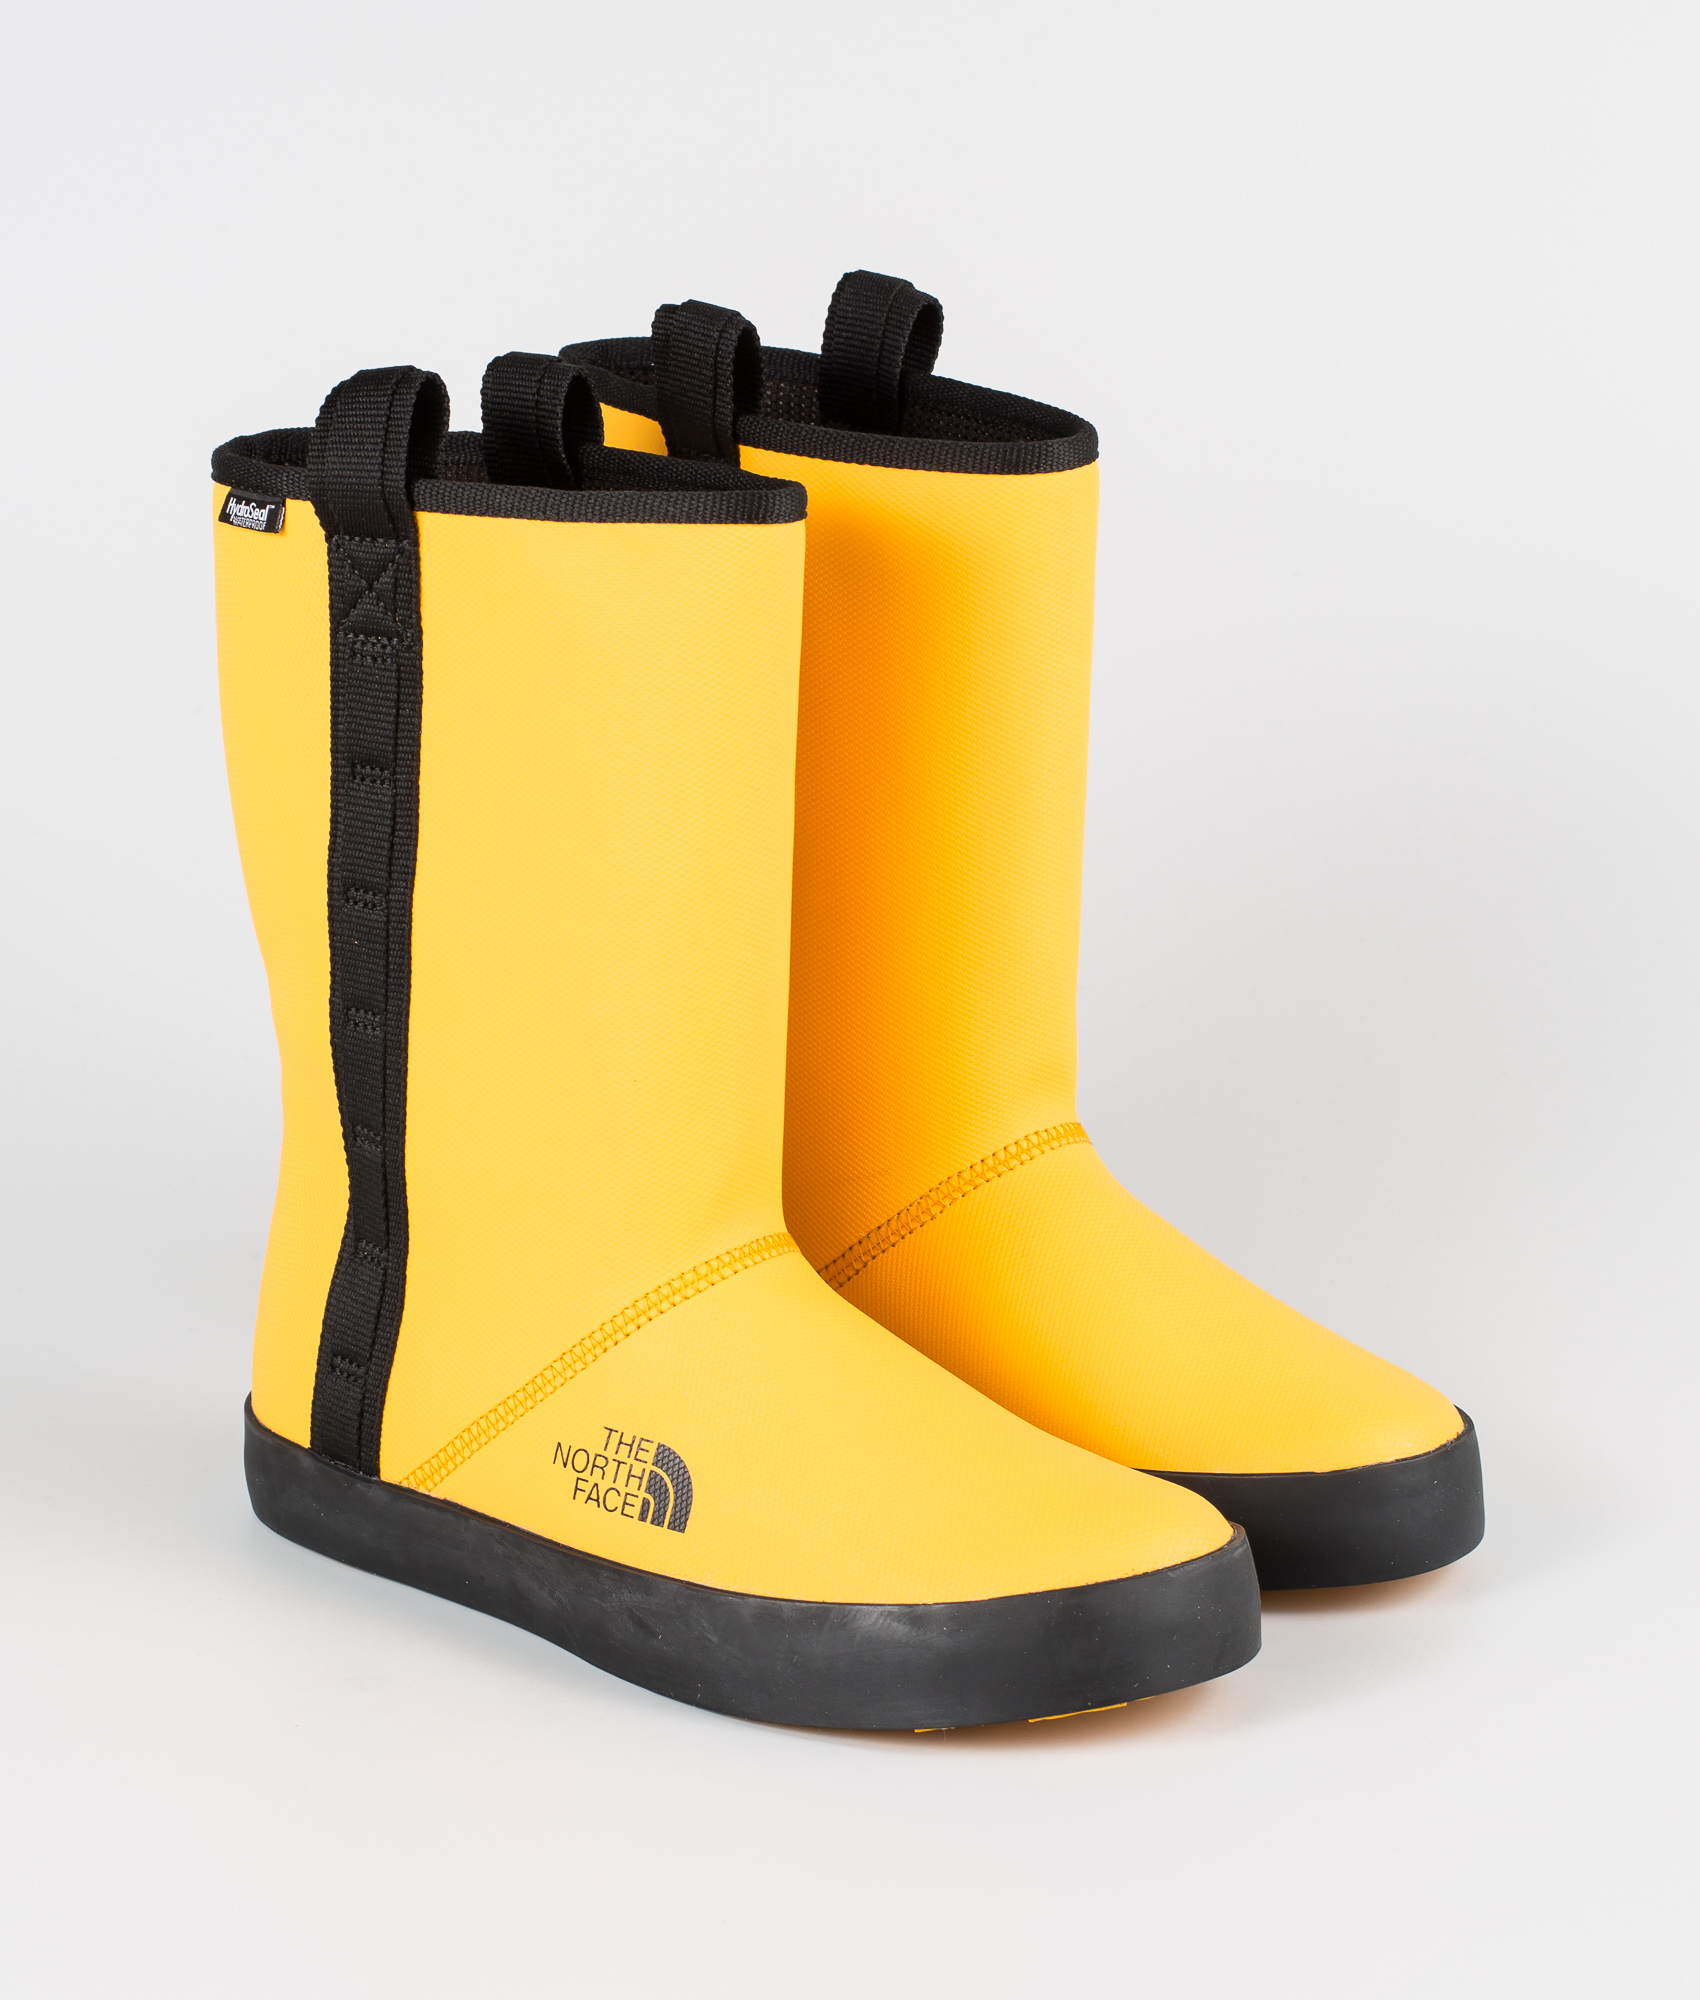 north face wellies